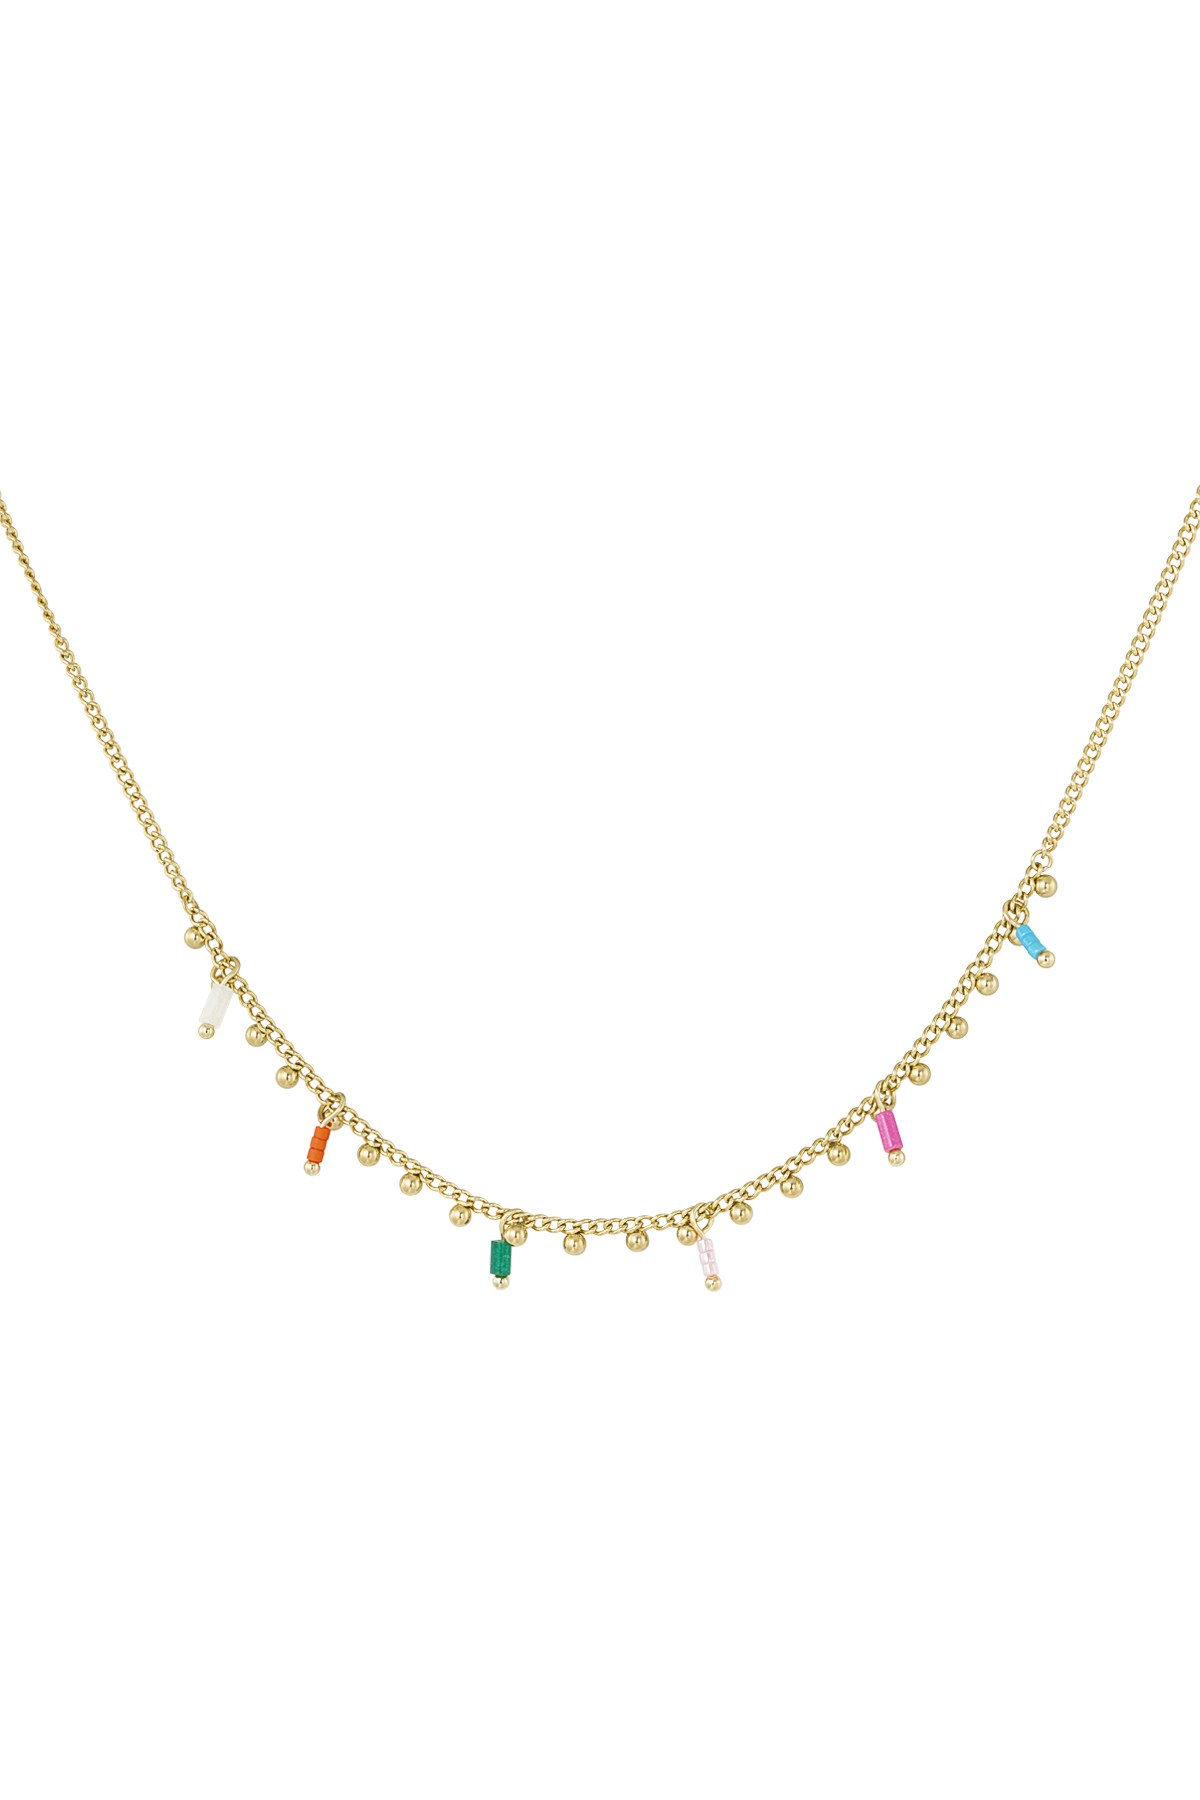 Charm necklace messy colors - gold